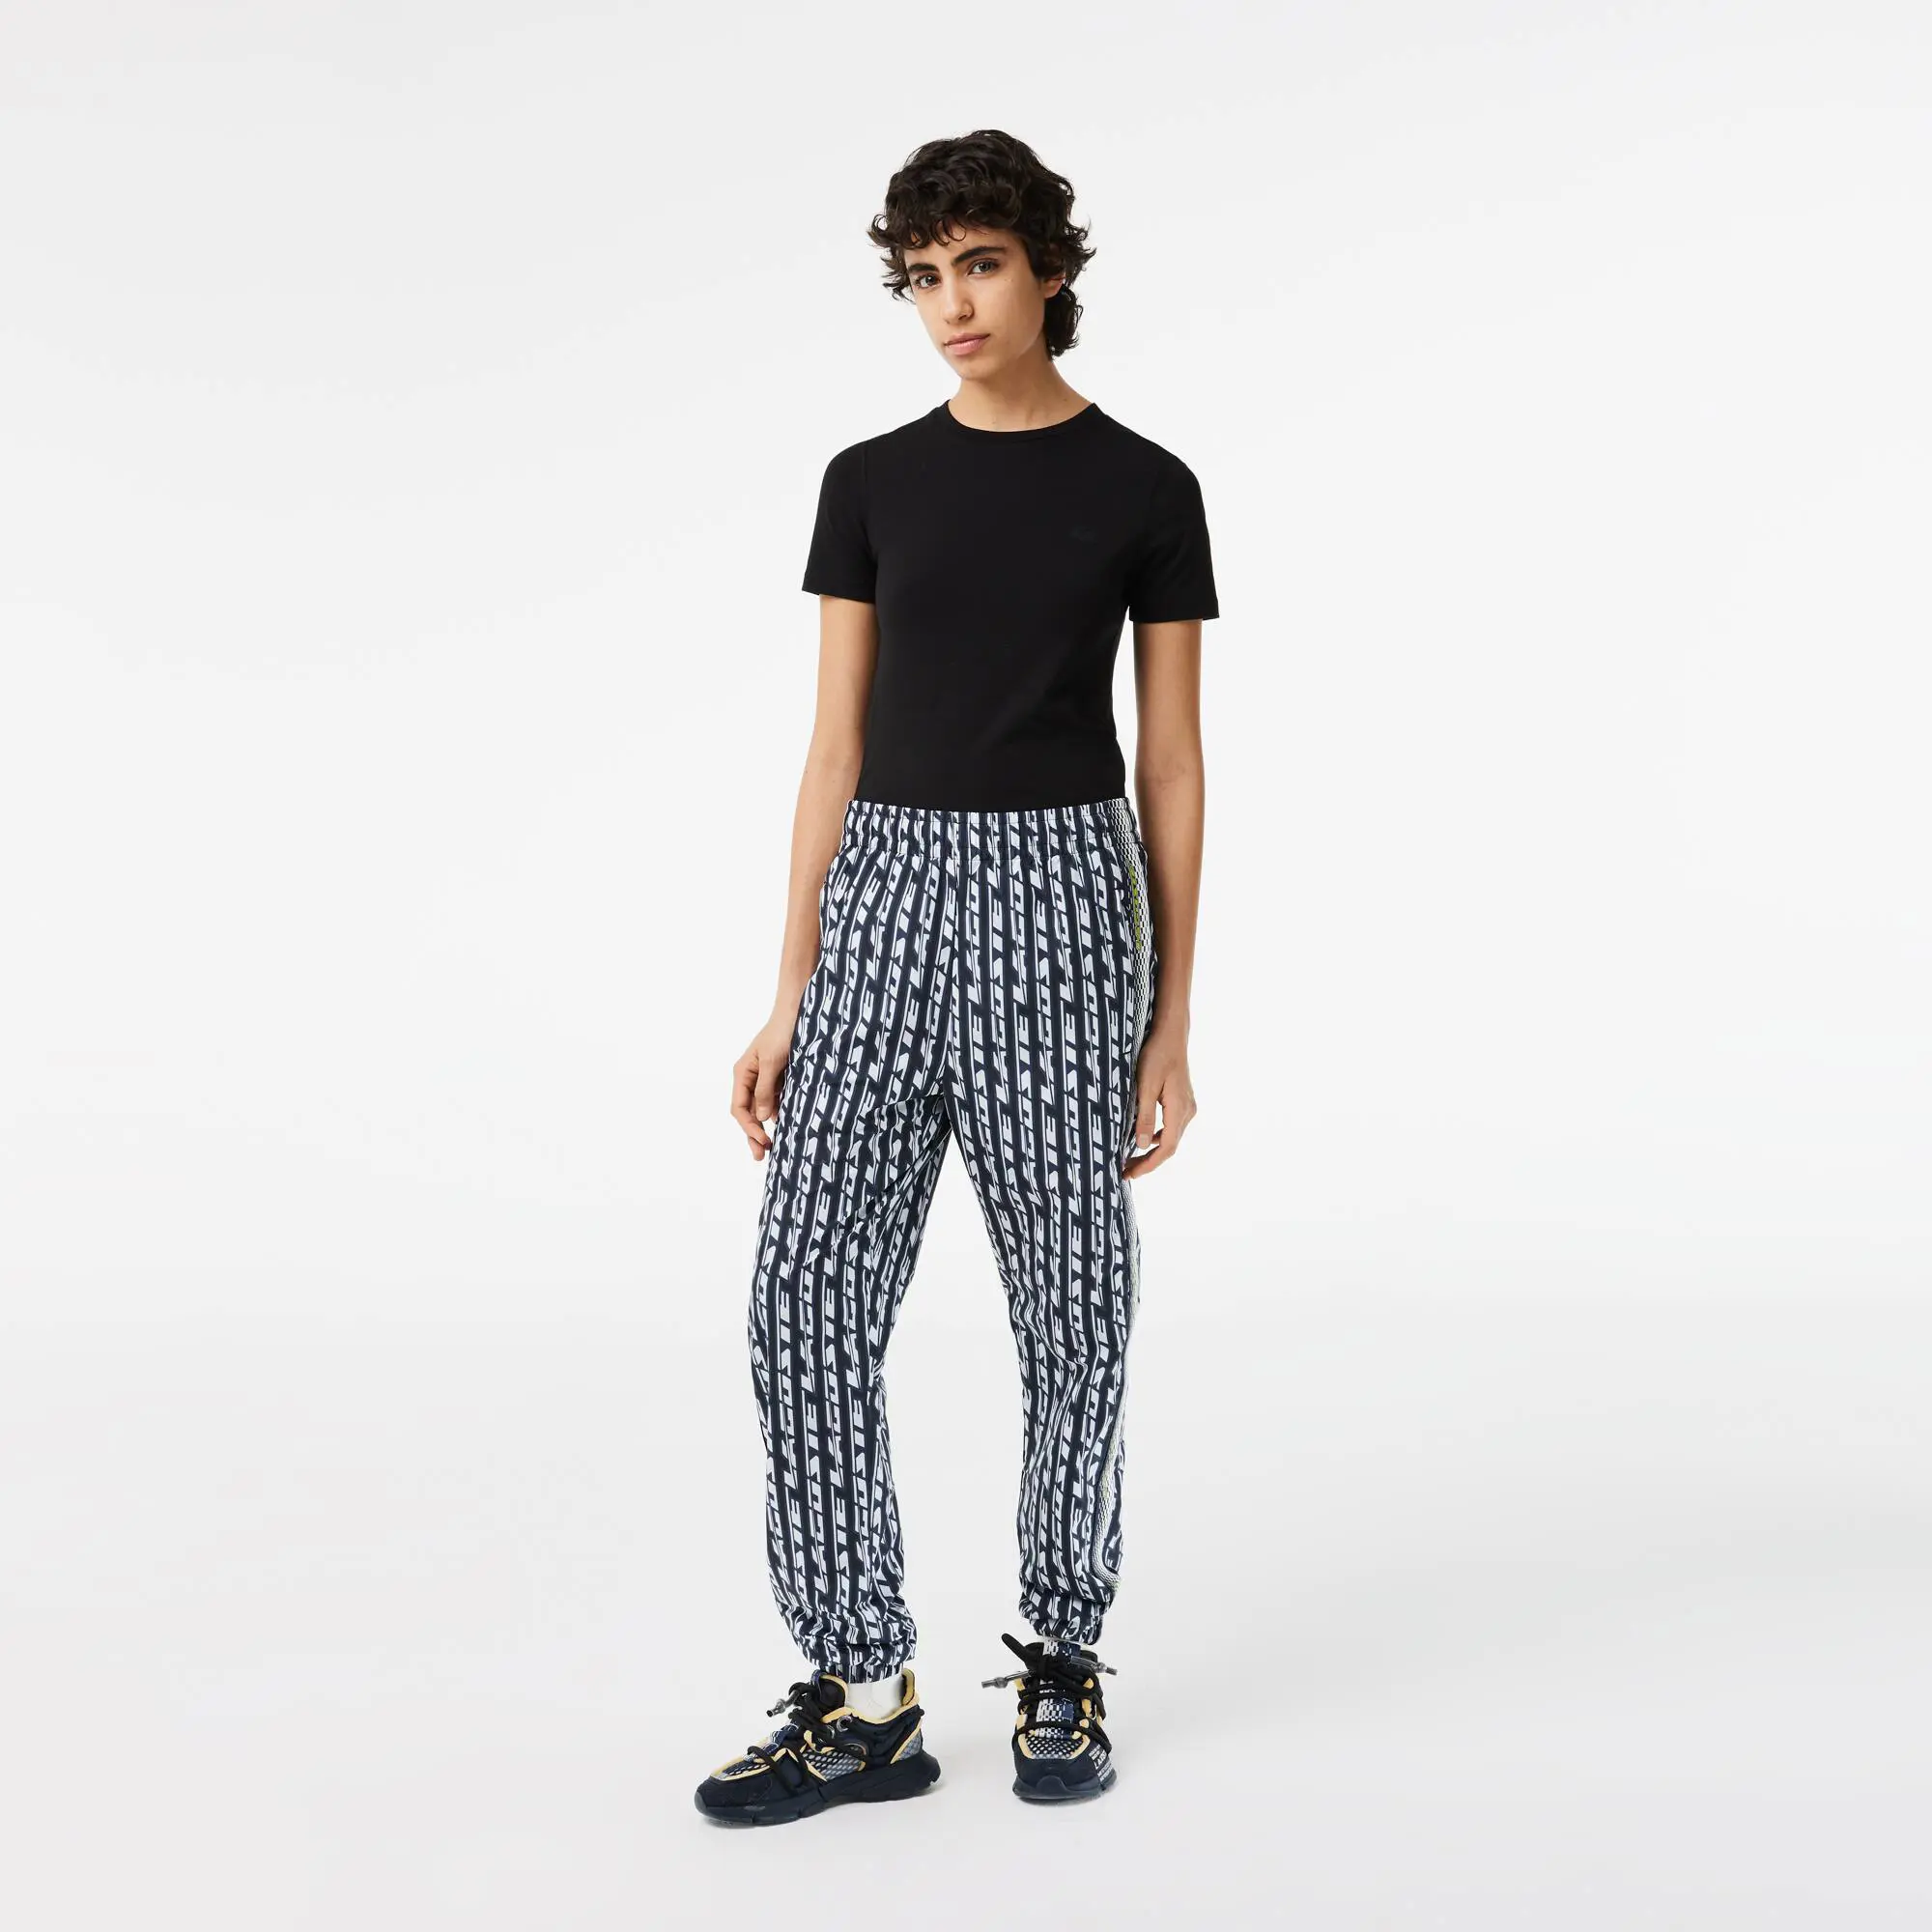 Lacoste Women’s Lacoste Track Pants with Logo Print. 1